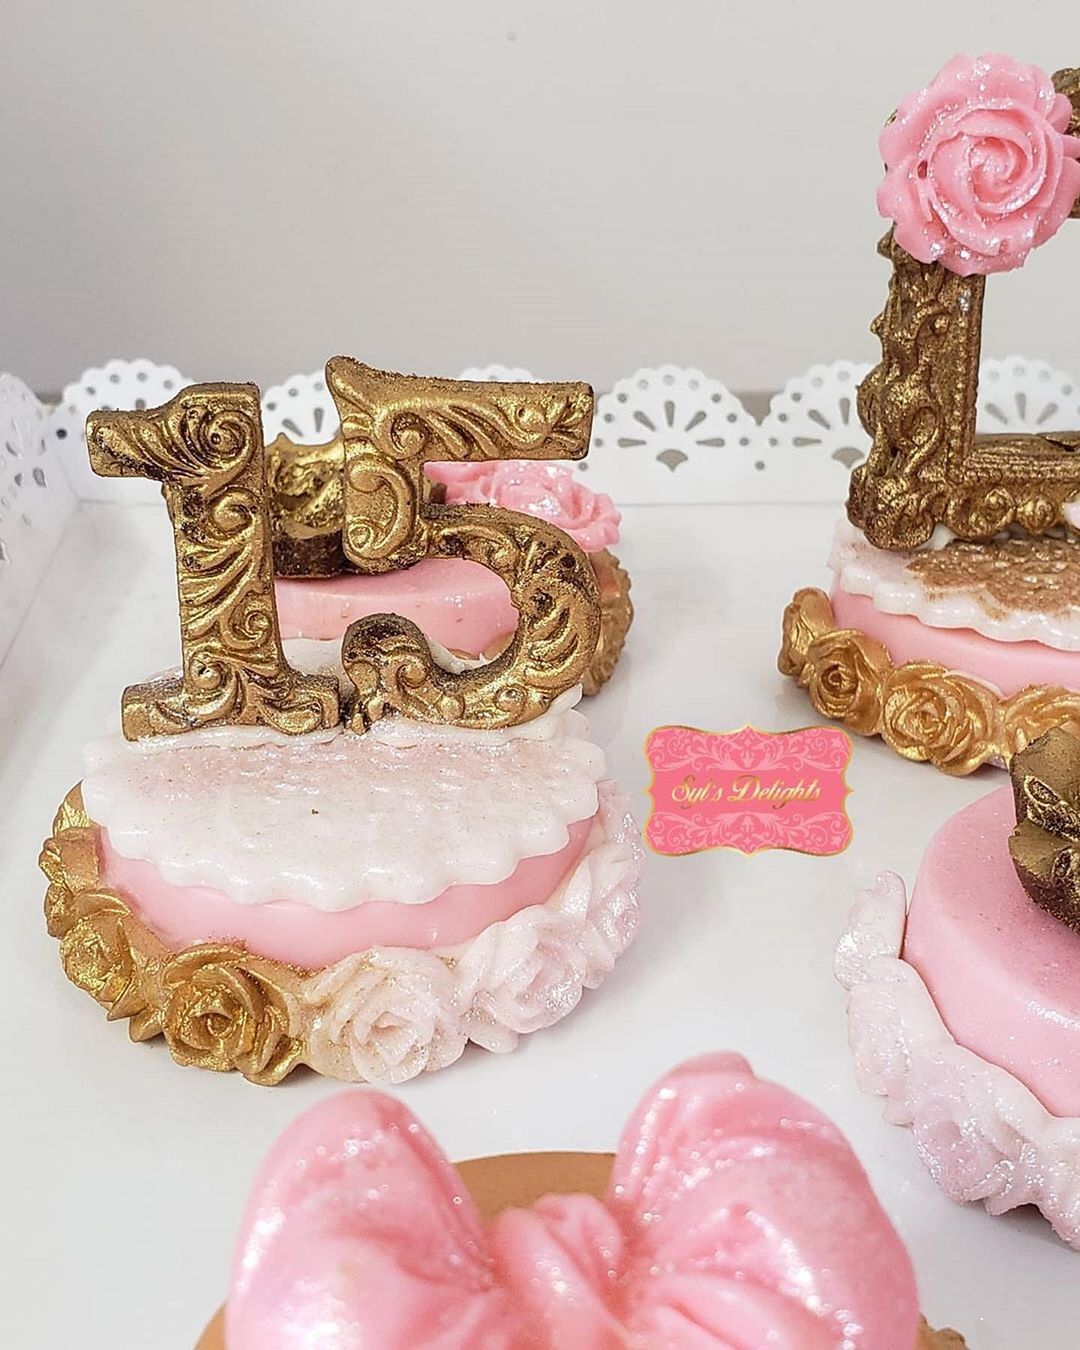 Instead of ordering an expensive cake topper, you can opt to make your own